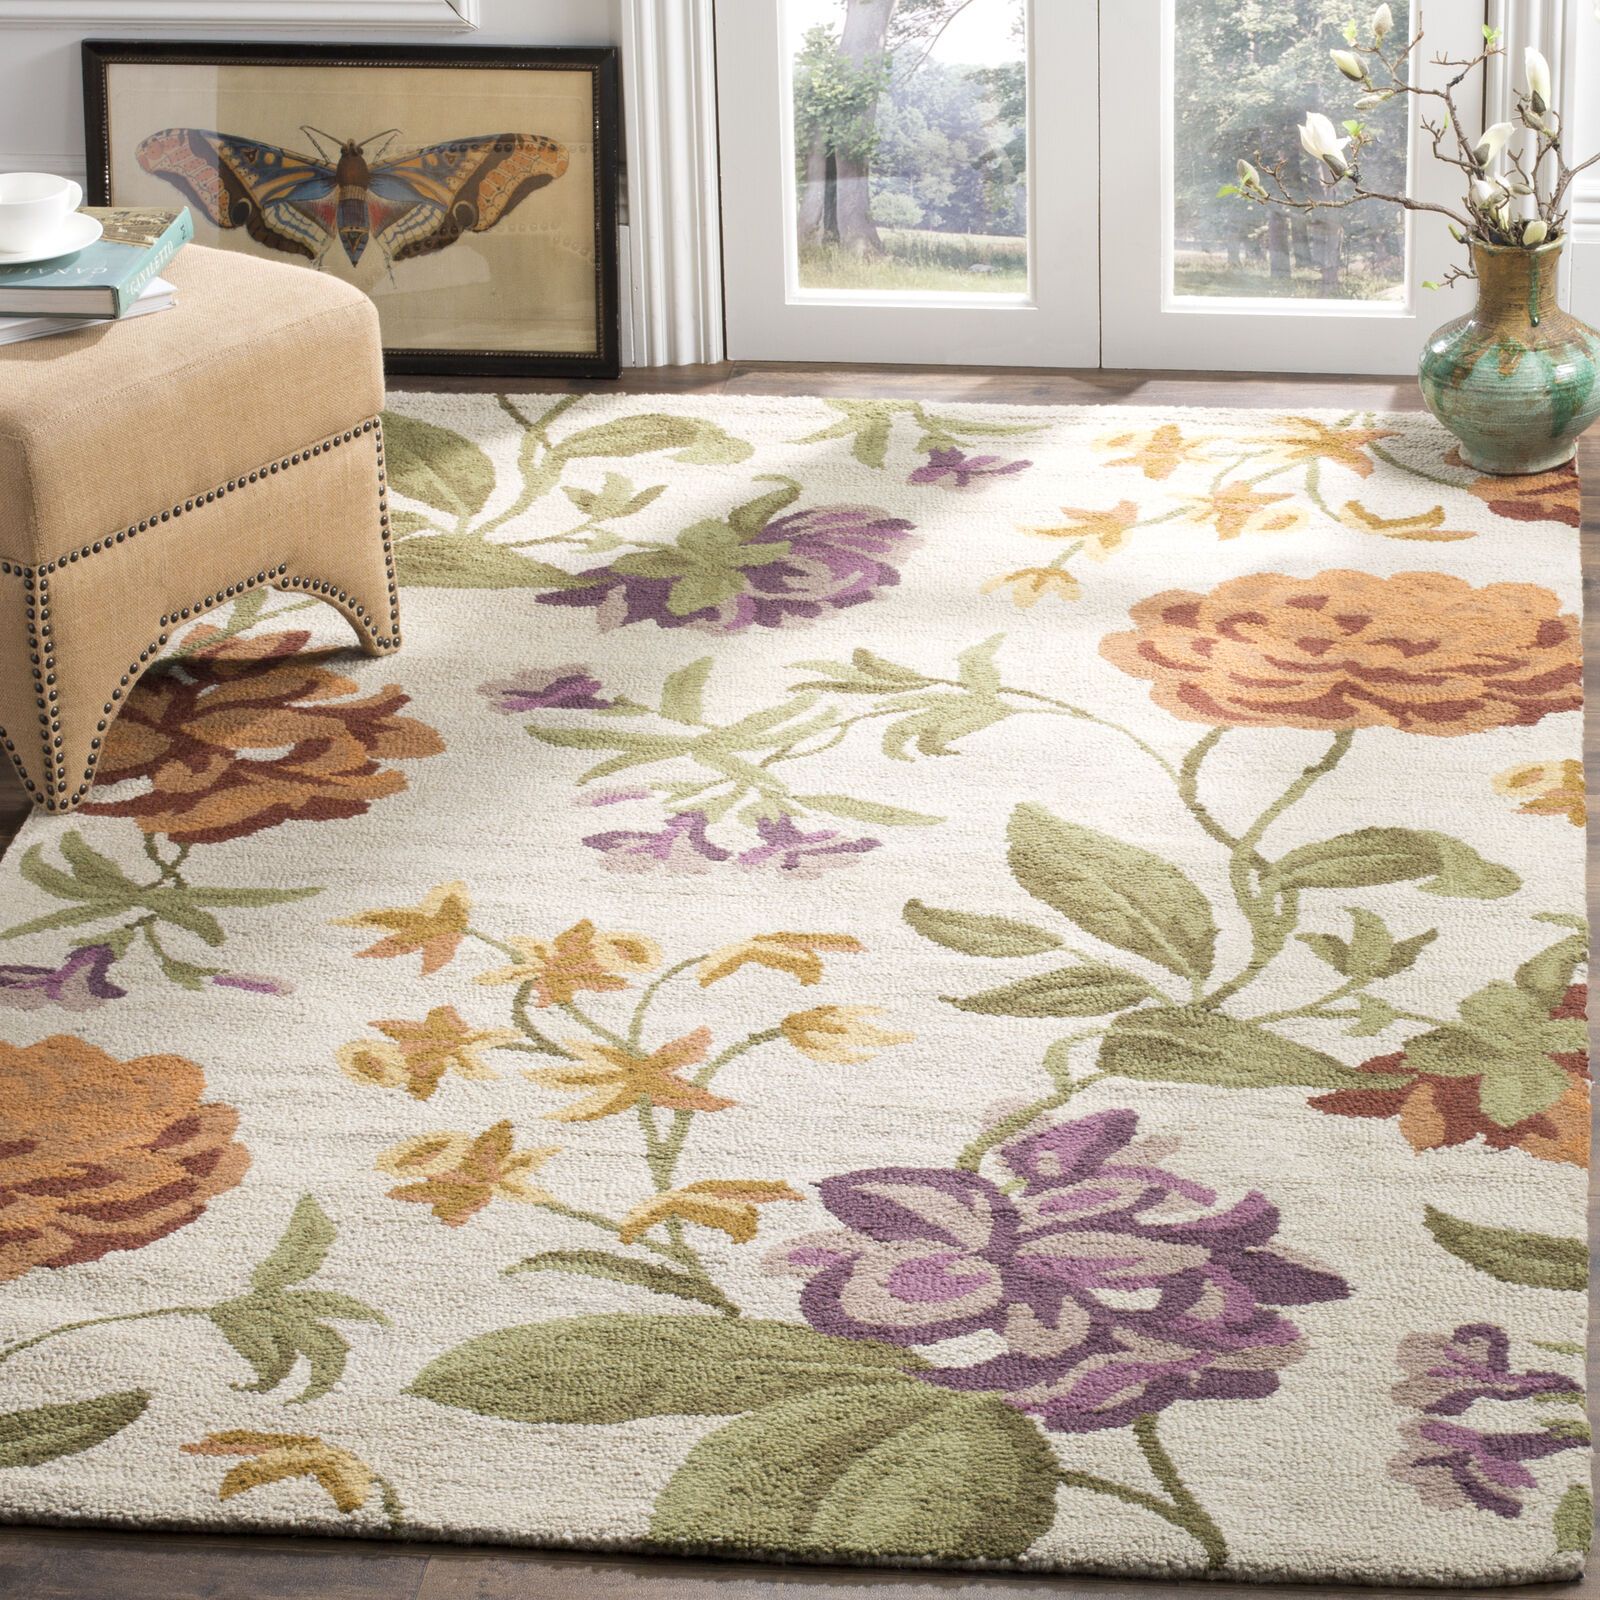 Safavieh Blossom Ivory / Multi Area Rug Blm788B | Ebay Throughout Ivory Blossom Rugs (View 14 of 15)